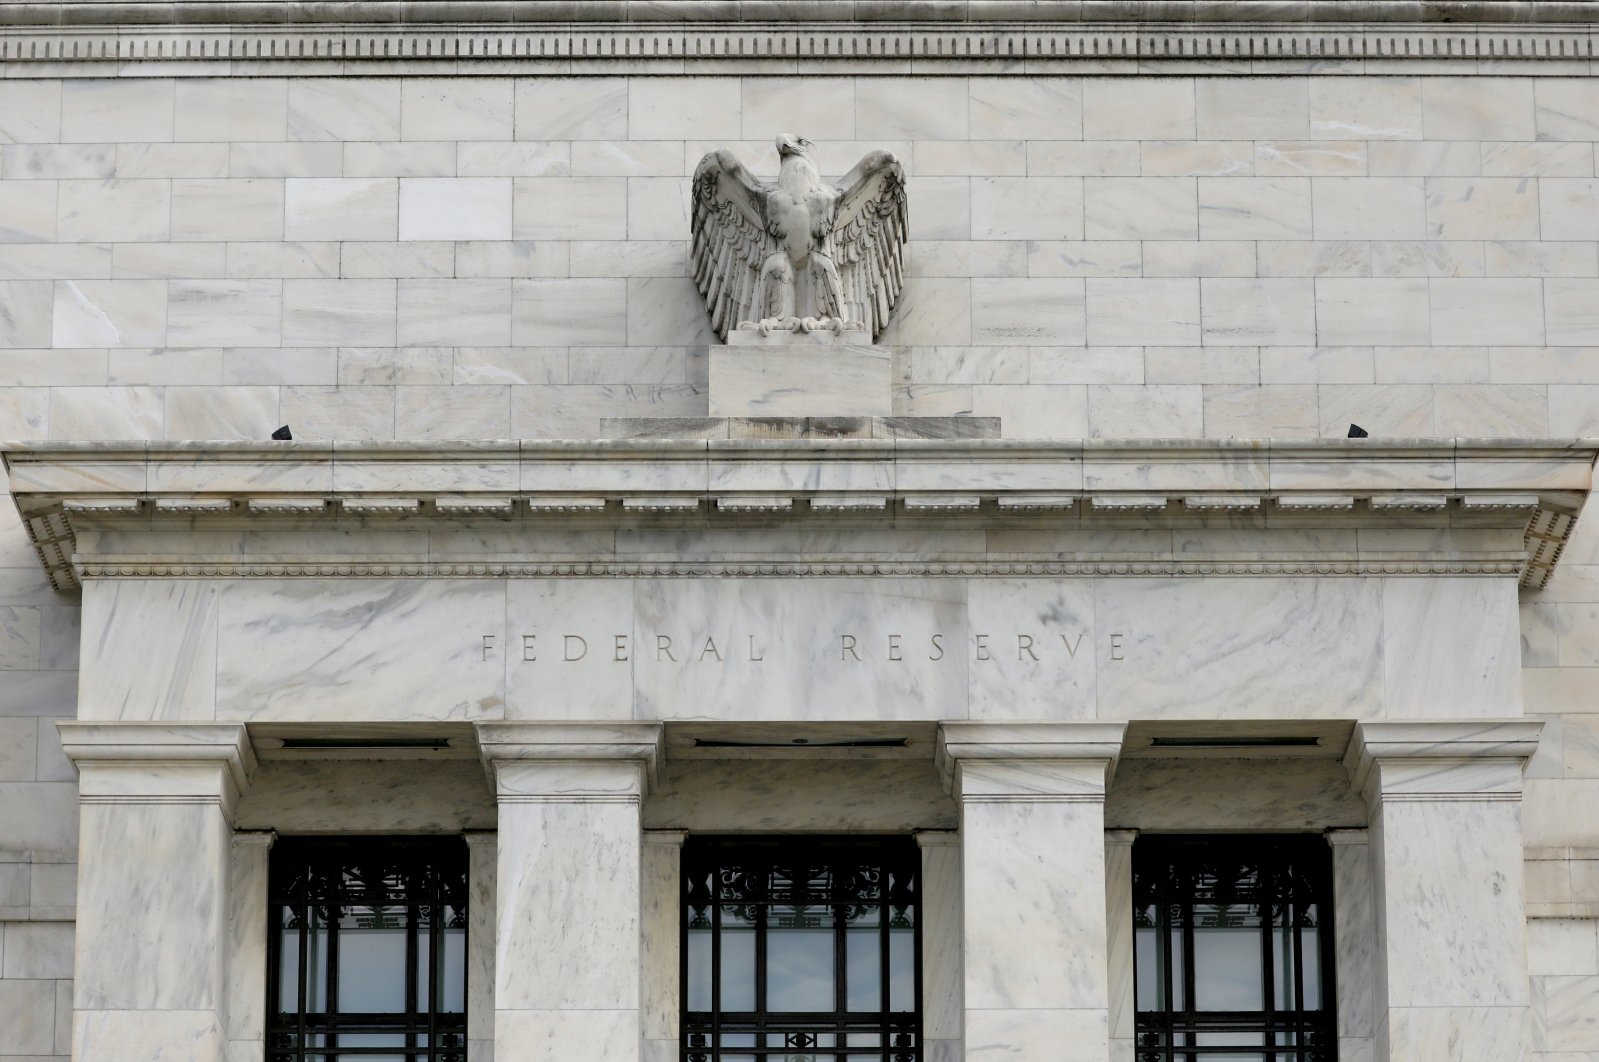 The Federal Reserve building is pictured in Washington, D.C., U.S., Aug. 22, 2018. (Reuters Photo)